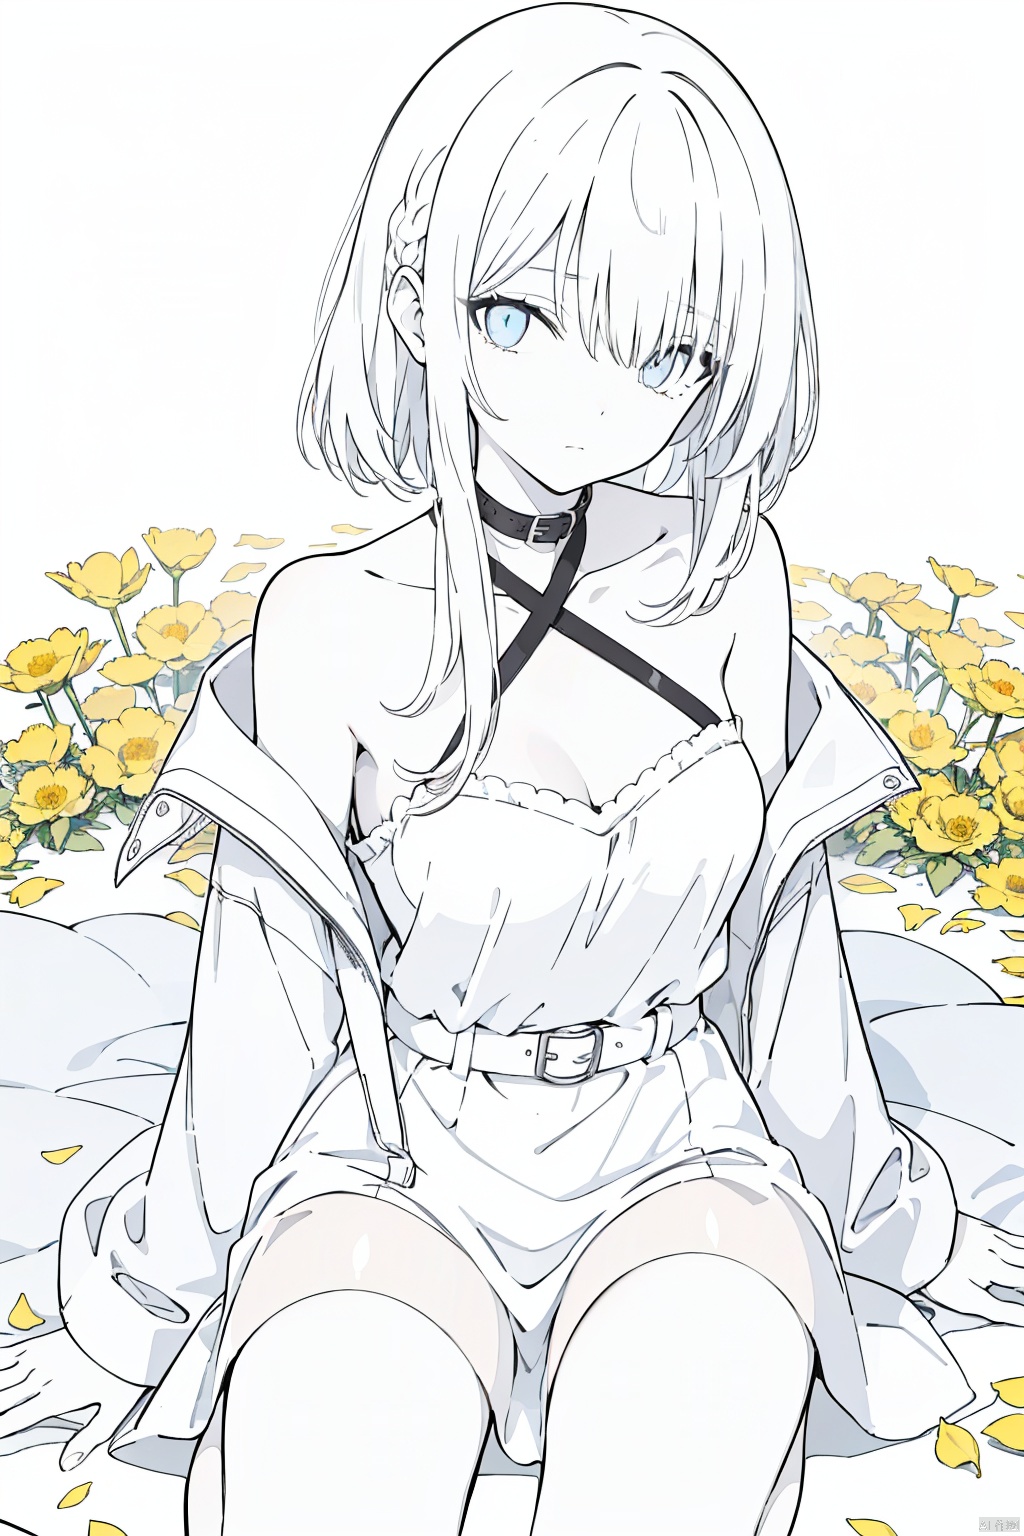  1girl, blue eyes, white long translucent night gown, expressionless, (white hair), hair cover one eye, long hair, blue hair flower, kneeling on lake, blood, (plenty of yellow petals:1.35), (white background:1.5), (English text), greyscale, monochrome,greyscale,monochrome,sketch,1 woman.blunt bangscut braid hair.(photorealstic  face).(ultradetailed:1.4).16K.bustshot.black and white  sequins front open off shoulder.redeyeliner.blackeyeshadow.bestquality.musterpiece.red neckbelt.